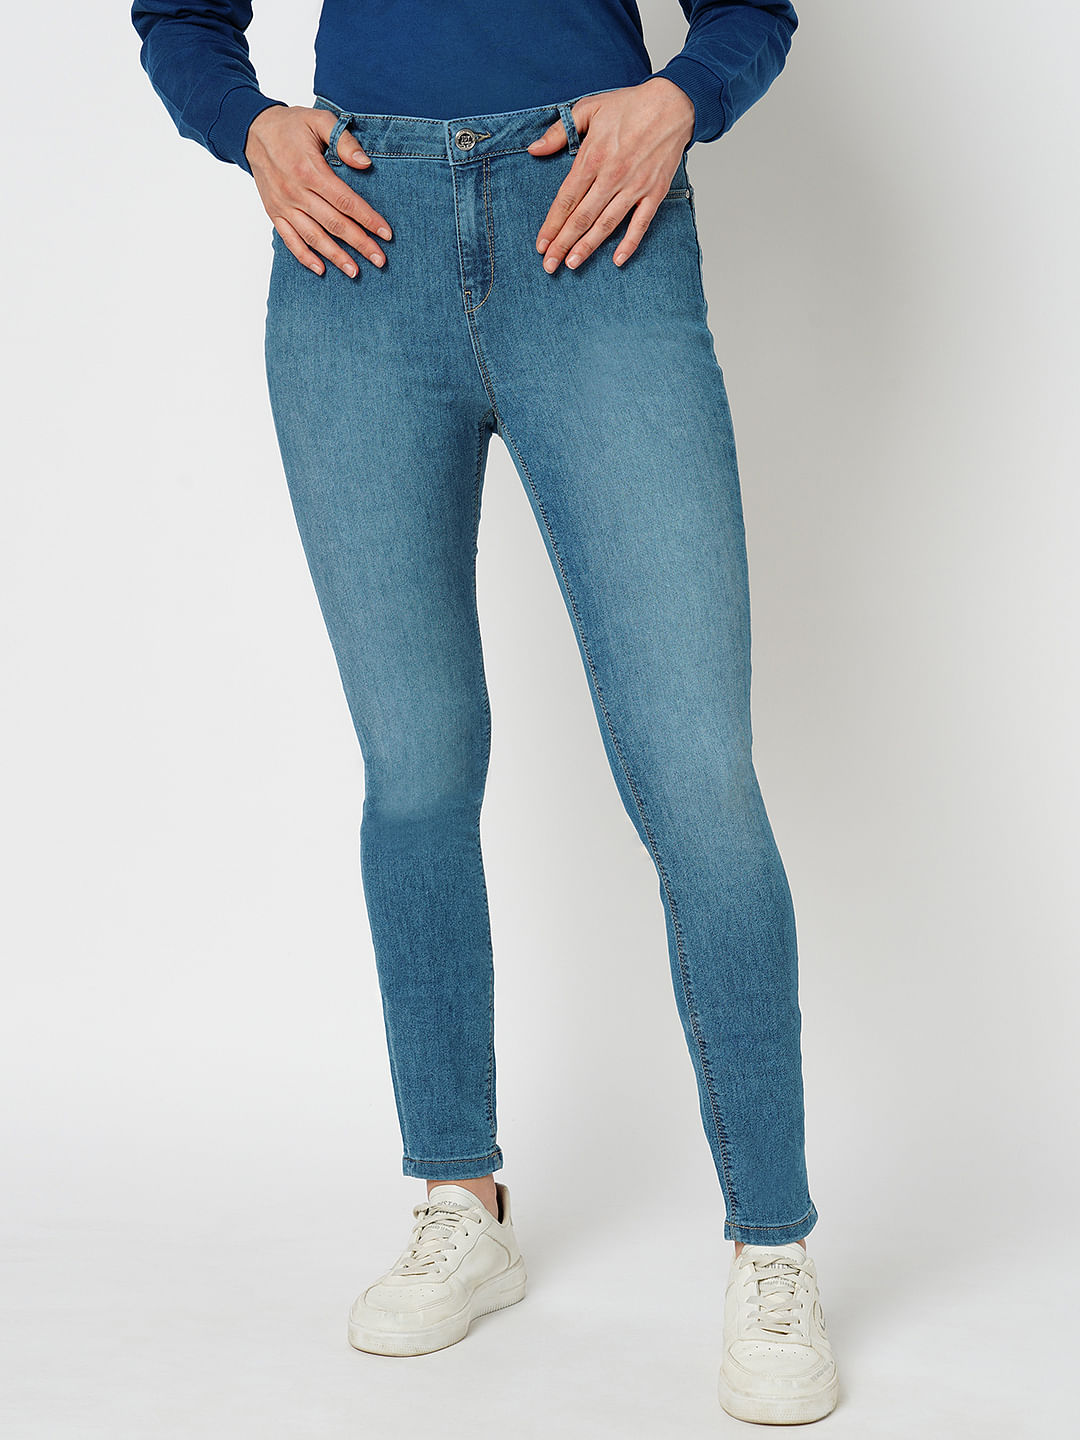 Light Blue Jeans in Bangalore at best price by S R & Sons - Justdial